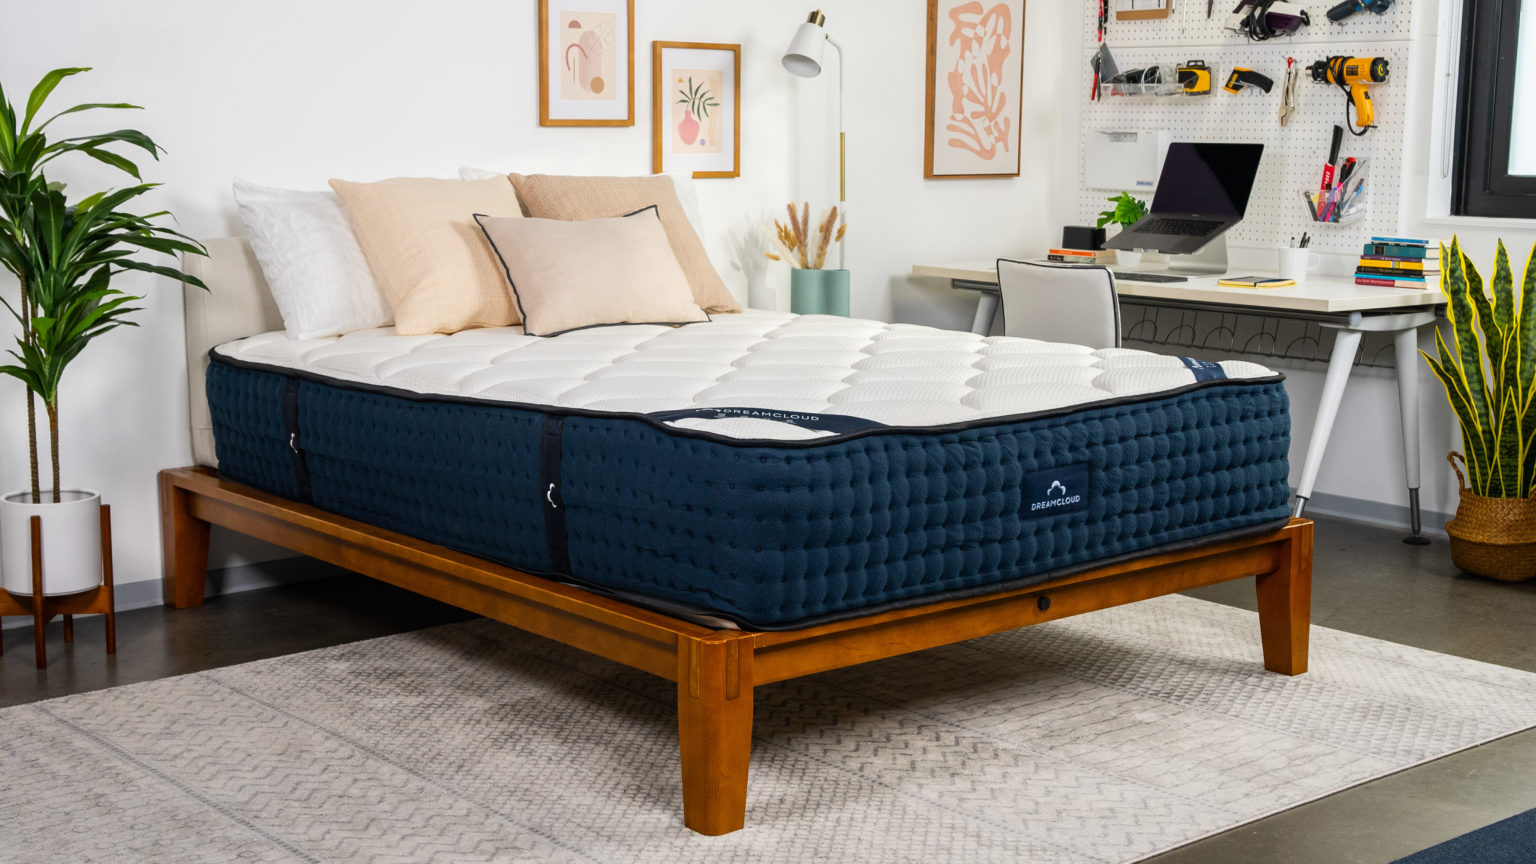 Diy Lack Floating Bed Frame: The Expert Guide to Creating Your Perfect Sleep Haven